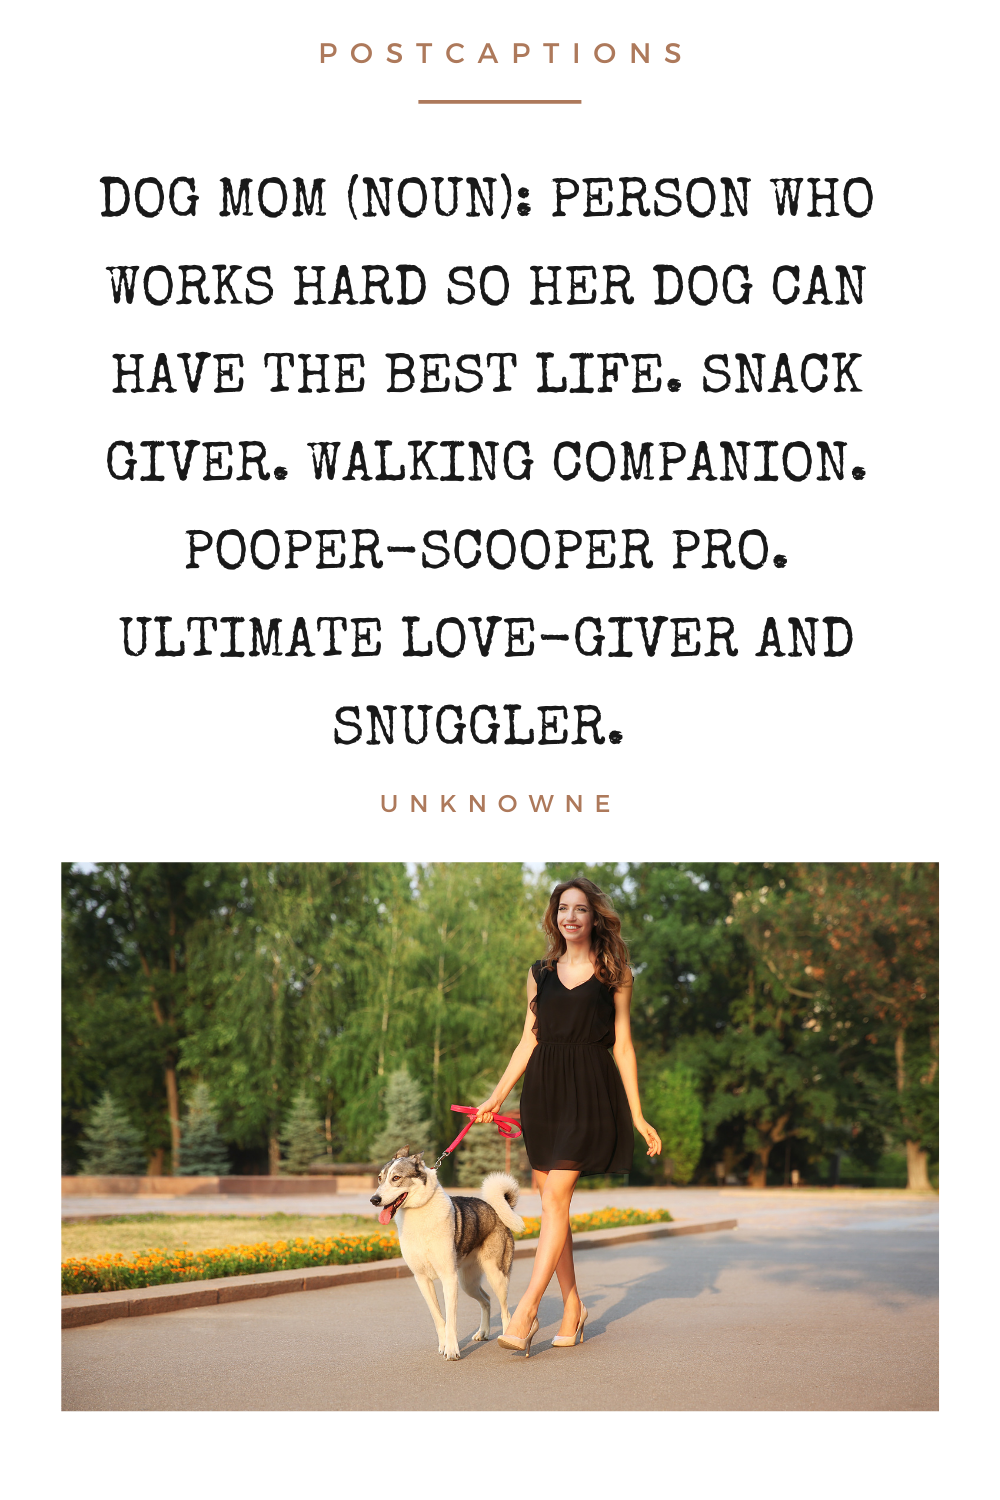 Dog mom quotes for Instagram